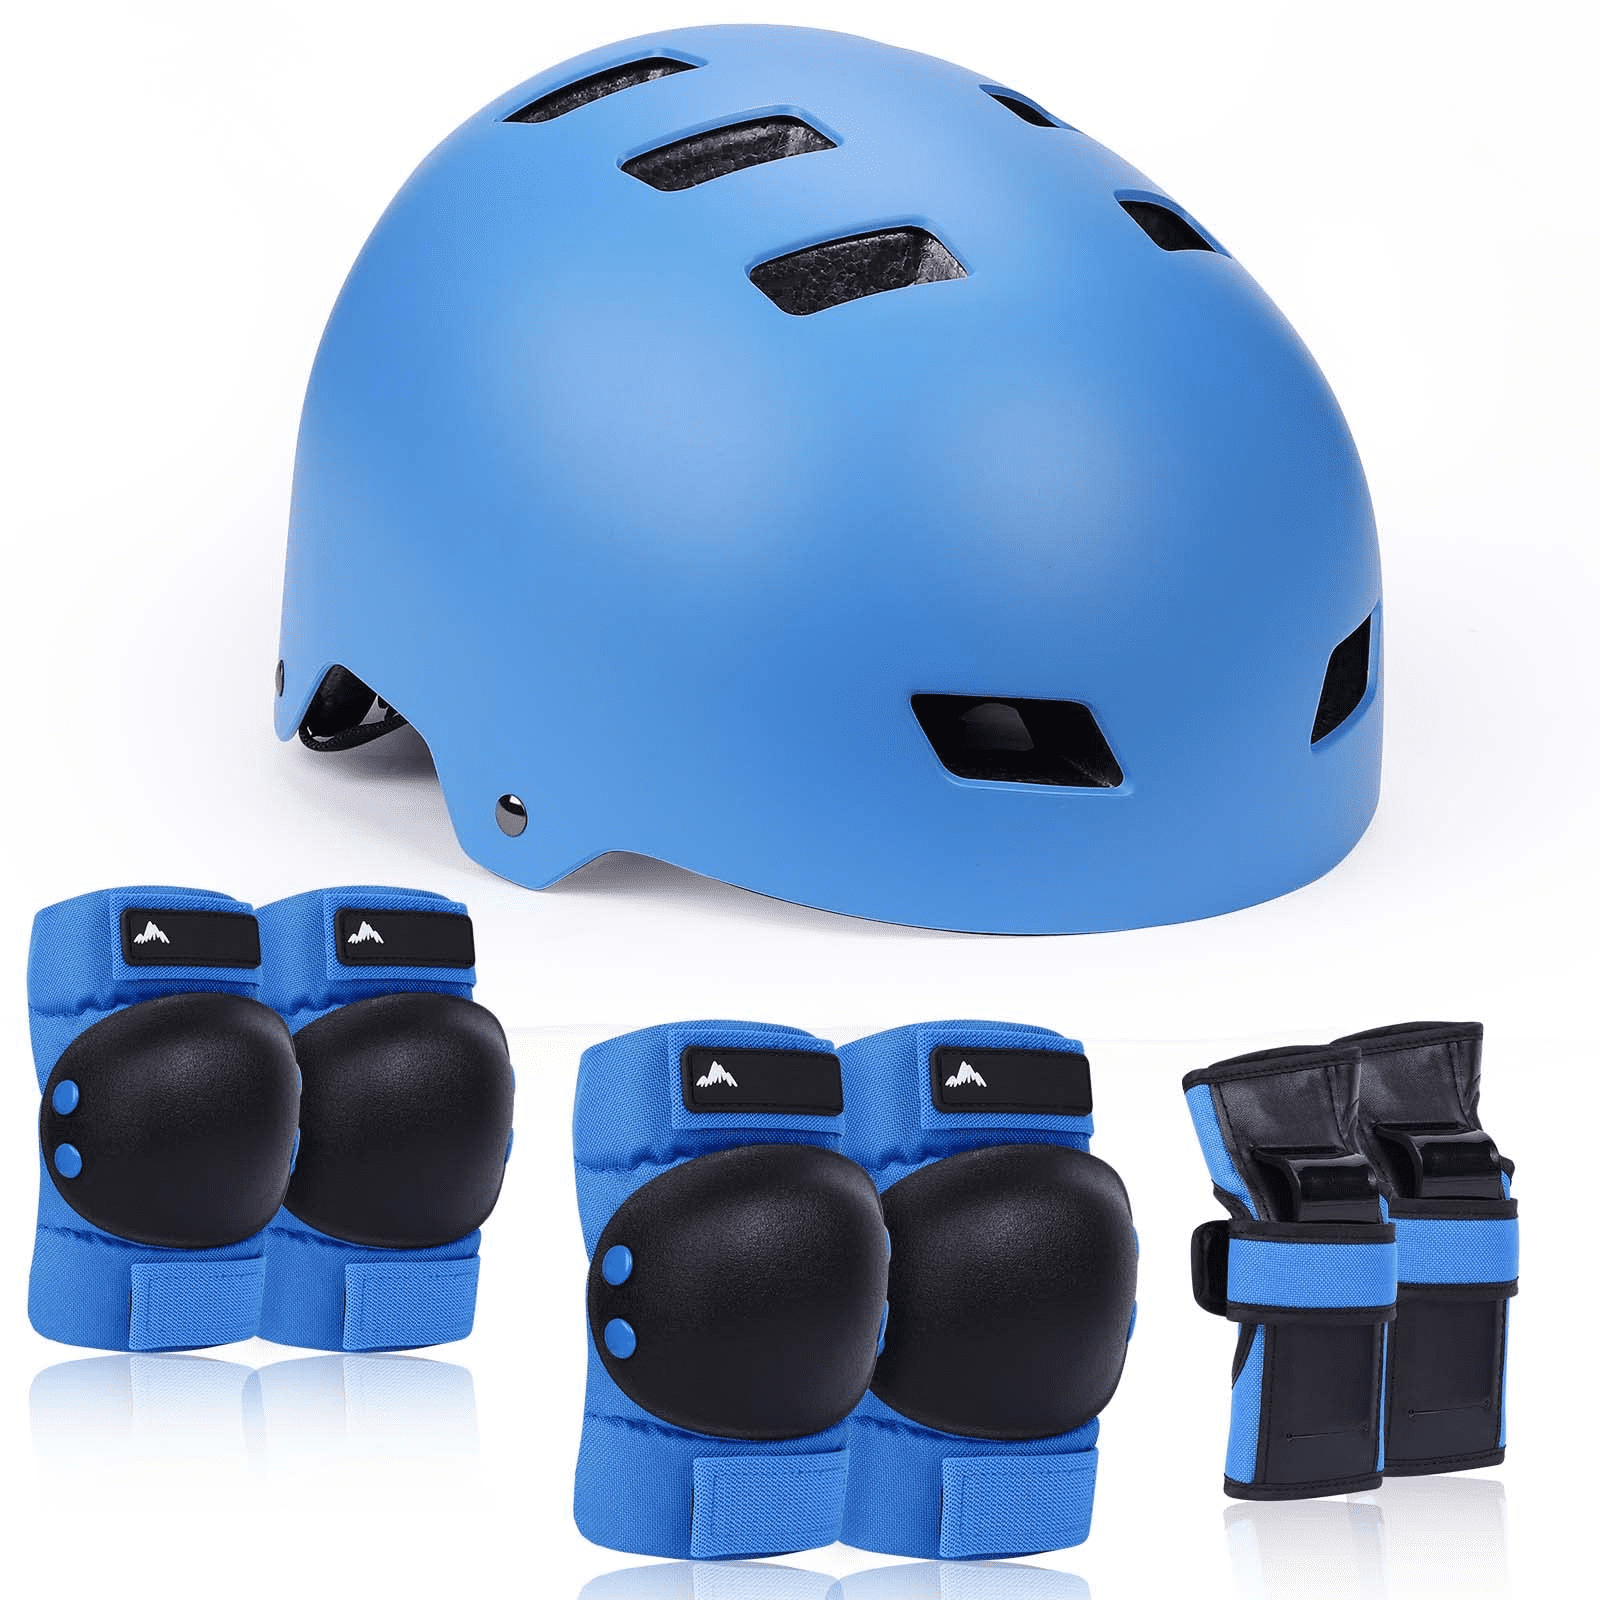 Apark Kids Bike Helmet Protective Gear Set Age 3-15 years Knee Pads Elbow Pads Wrist Guards and Adjustable Skateboard Helmets for Scooter Cycling Roller Skating Boys Girls Child